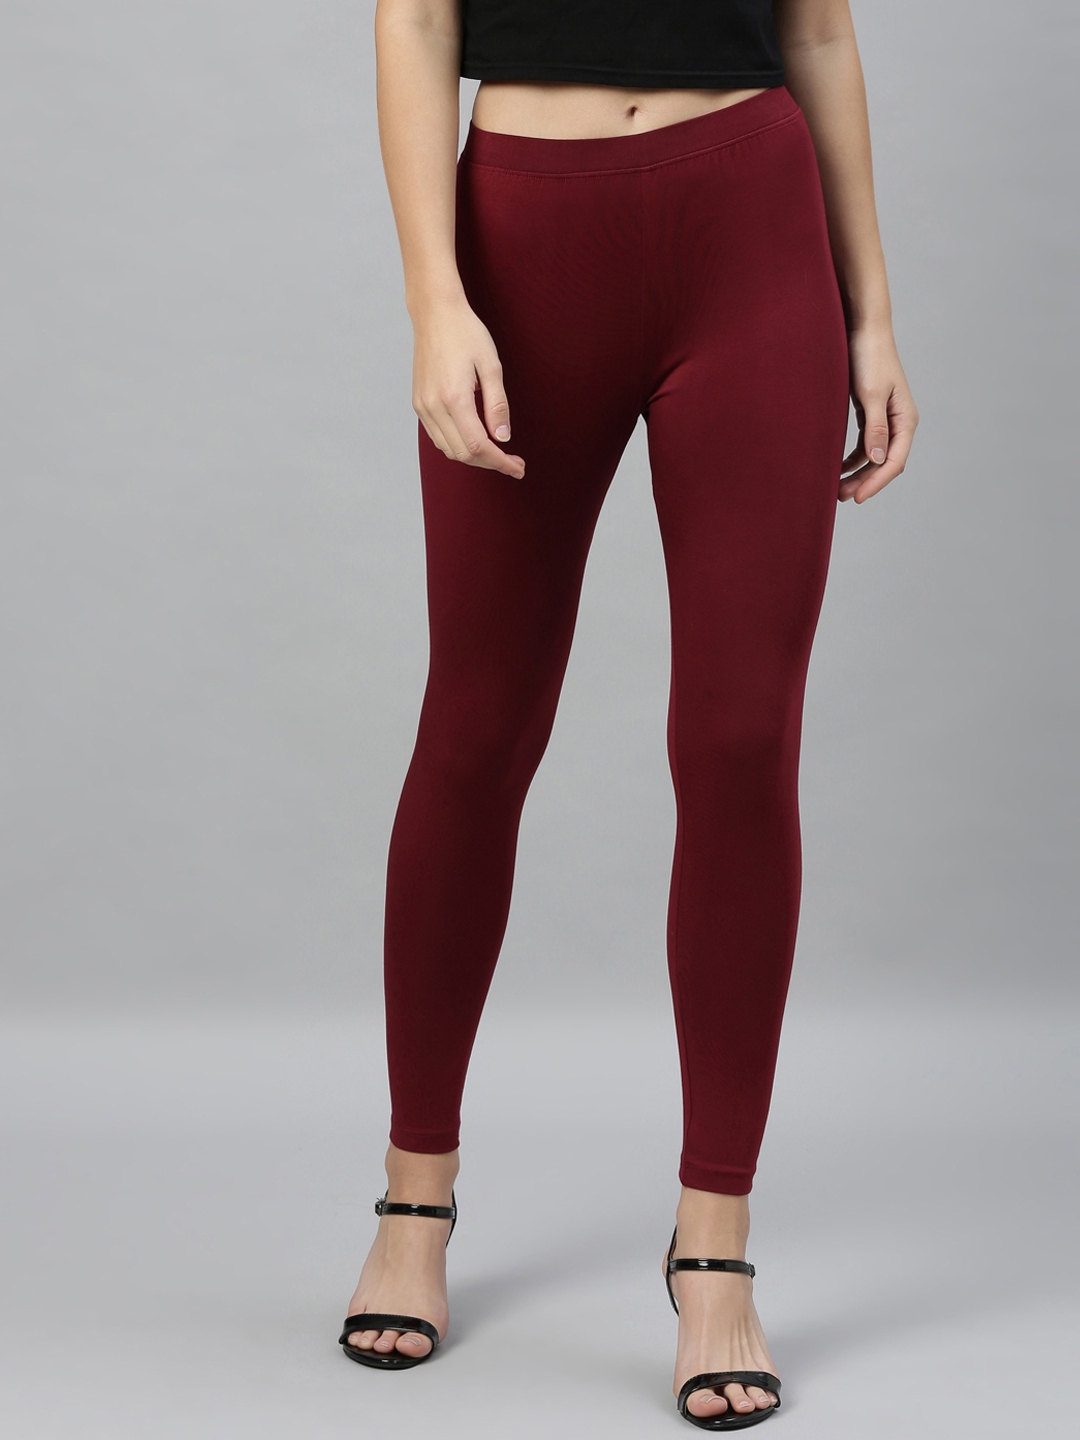 Kryptic | Kryptic Women's Cotton Stretch Solid Ankle Length Leggings